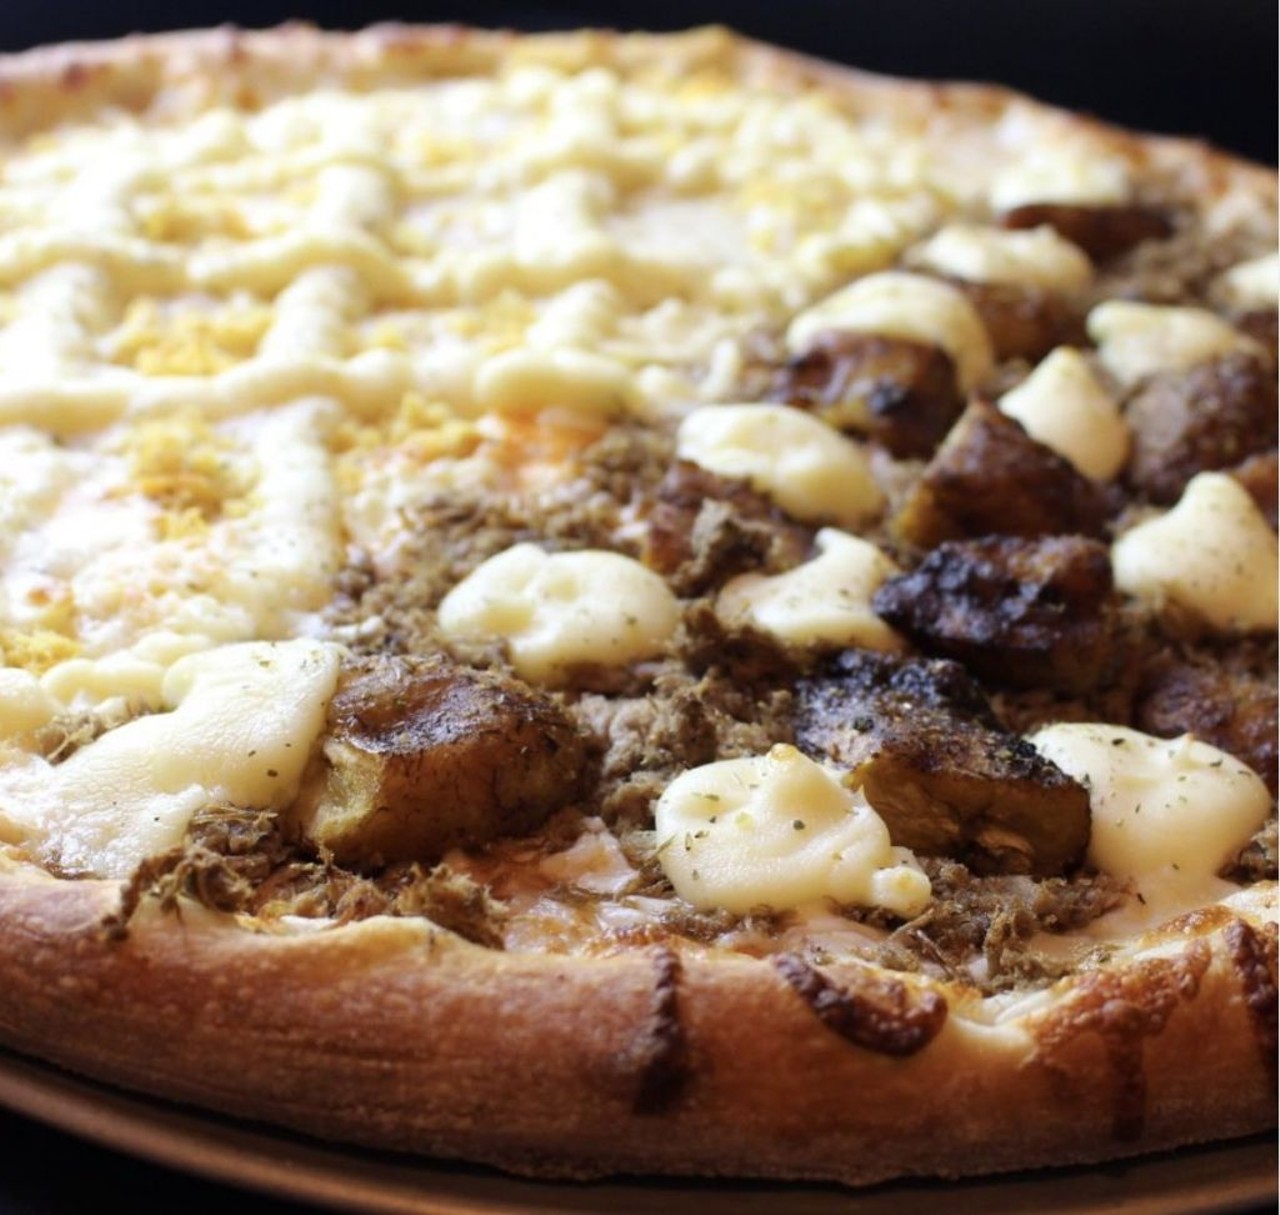  The Paraiba 
Piefection, 3120 S. Kirkman Road
Pie-Fection brings us the Paraiba, a pizza with jerked beef, caramelized bananas and Catupiry cheese on top. 
Photo via Instagram